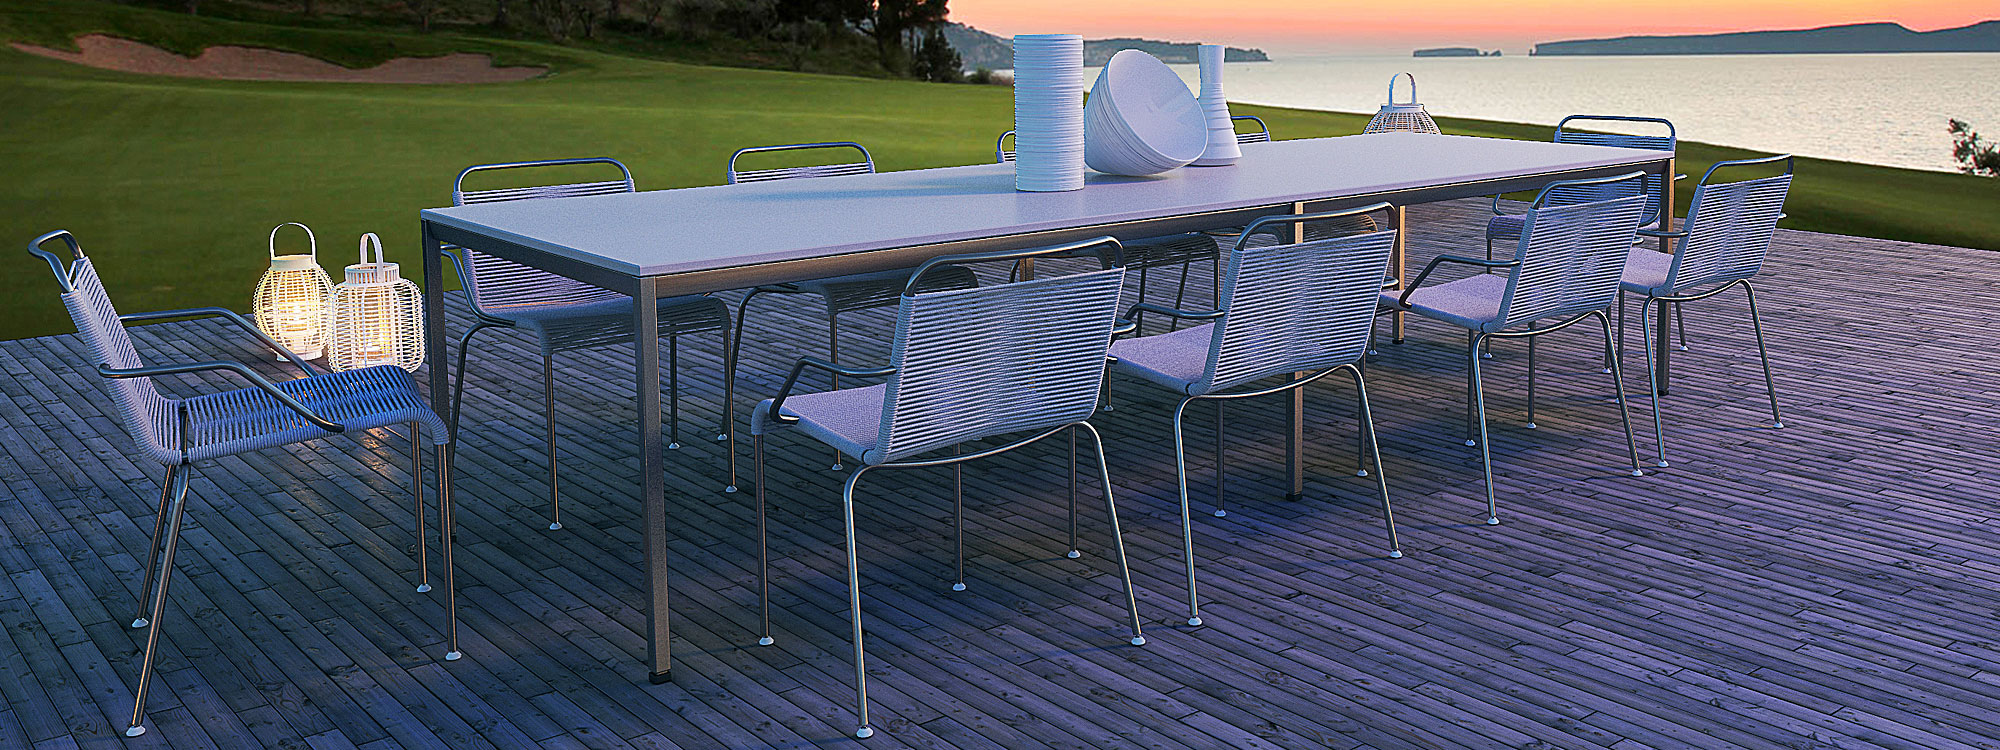 Image of Coro Jubeae stainless steel garden armchairs around long rectangular dining table on decking at sunset